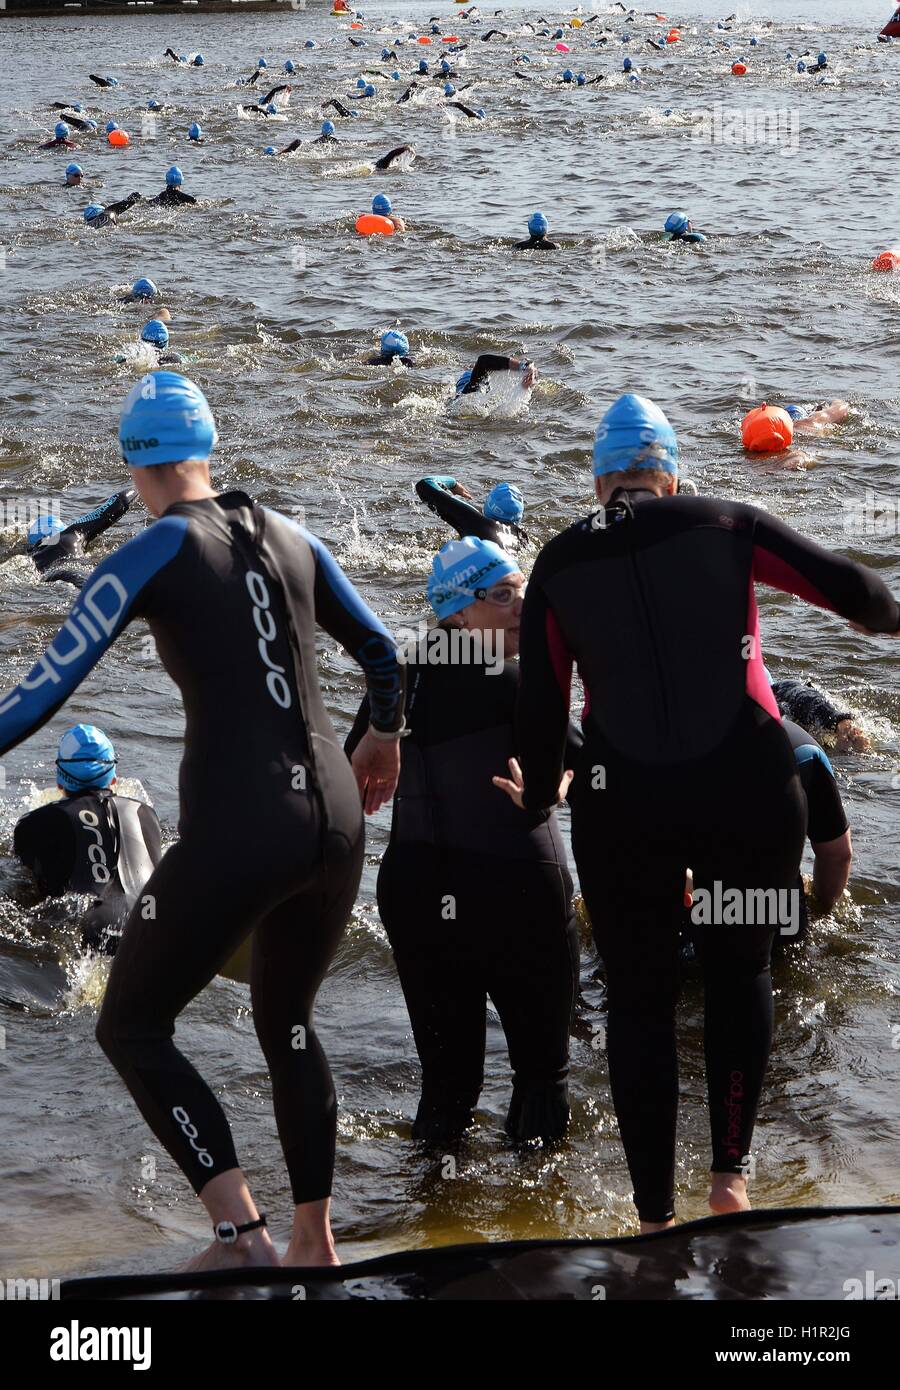 A small section of the third wave of 350 swimmers, who are taking part in the Swim Serpentine 2016, which will see an estimated 6,000 people swim a mile in the Hyde Park lake in central London. Stock Photo